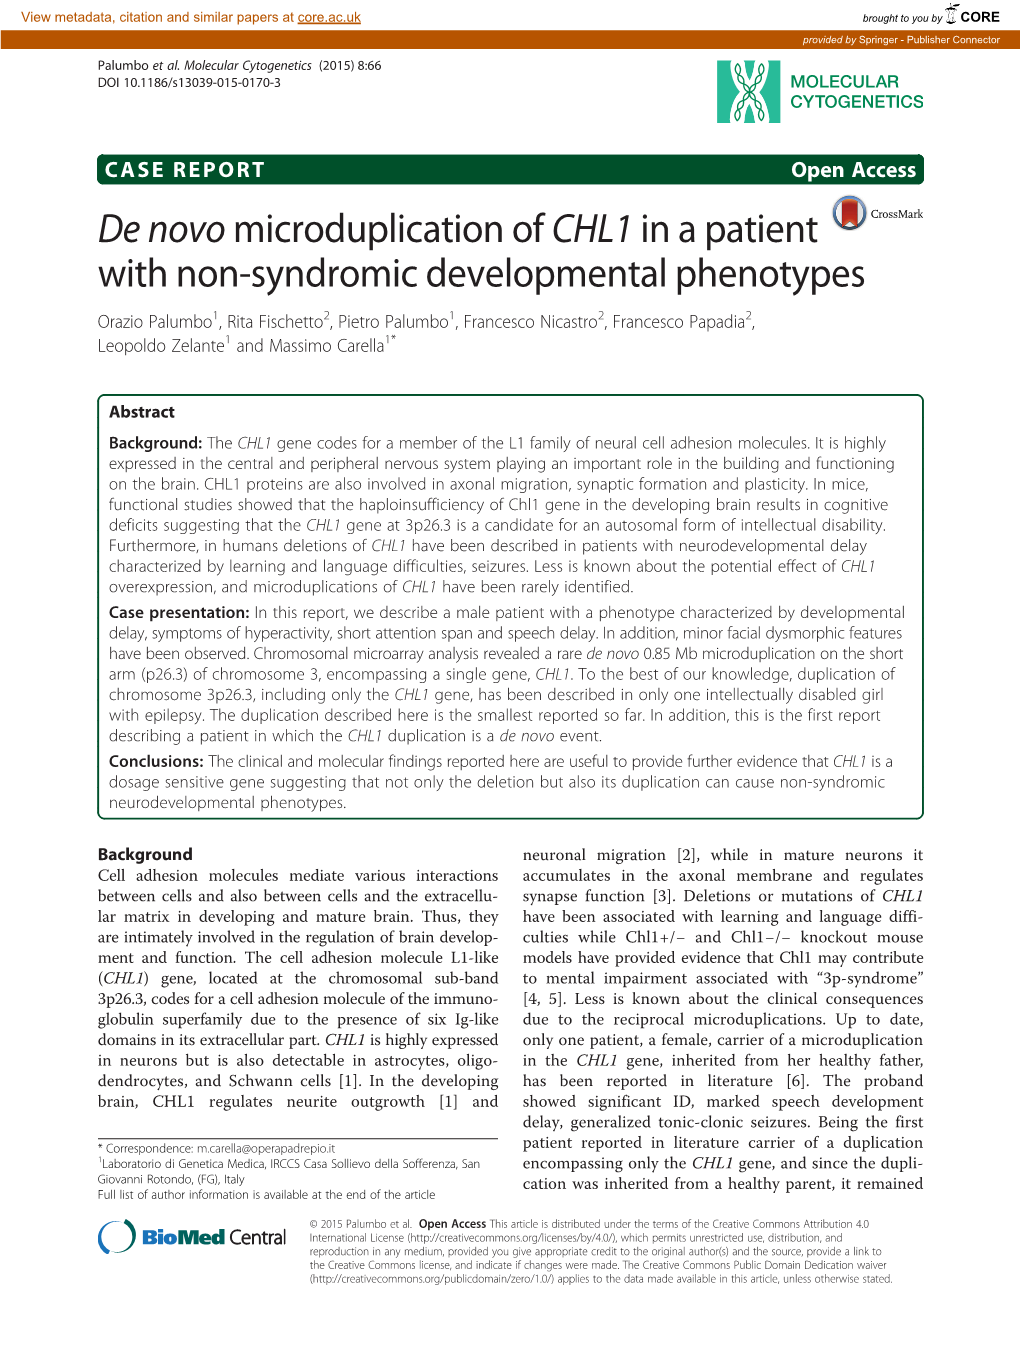 De Novo Microduplication of CHL1 in a Patient with Non-Syndromic